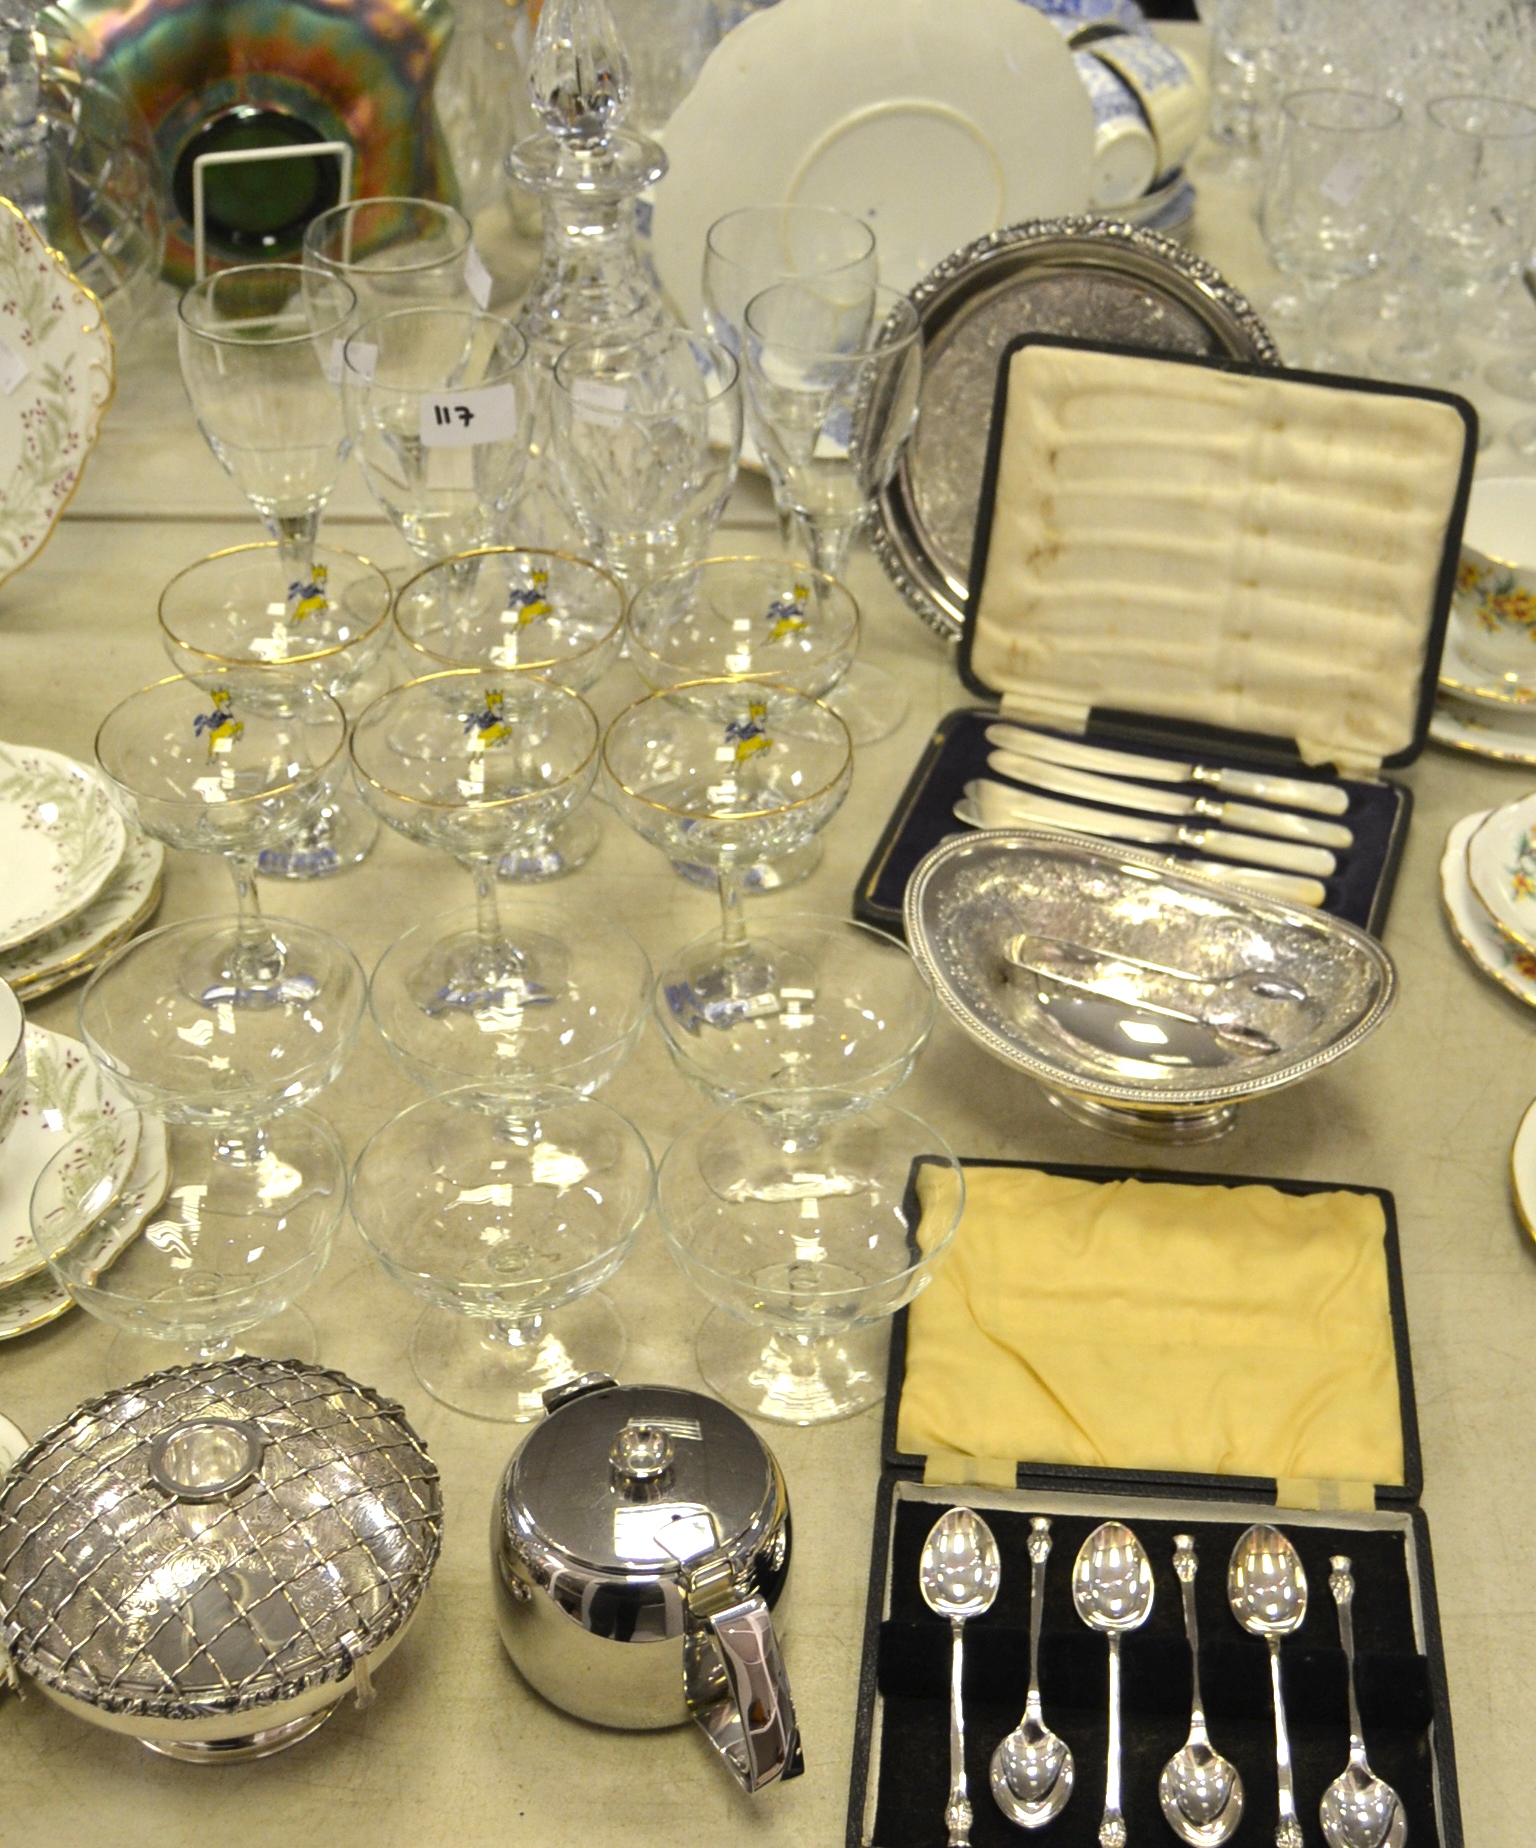 A cut glass decanter; Babycham glasses, champagne coupes, wine glasses, silver plated rose bowl,